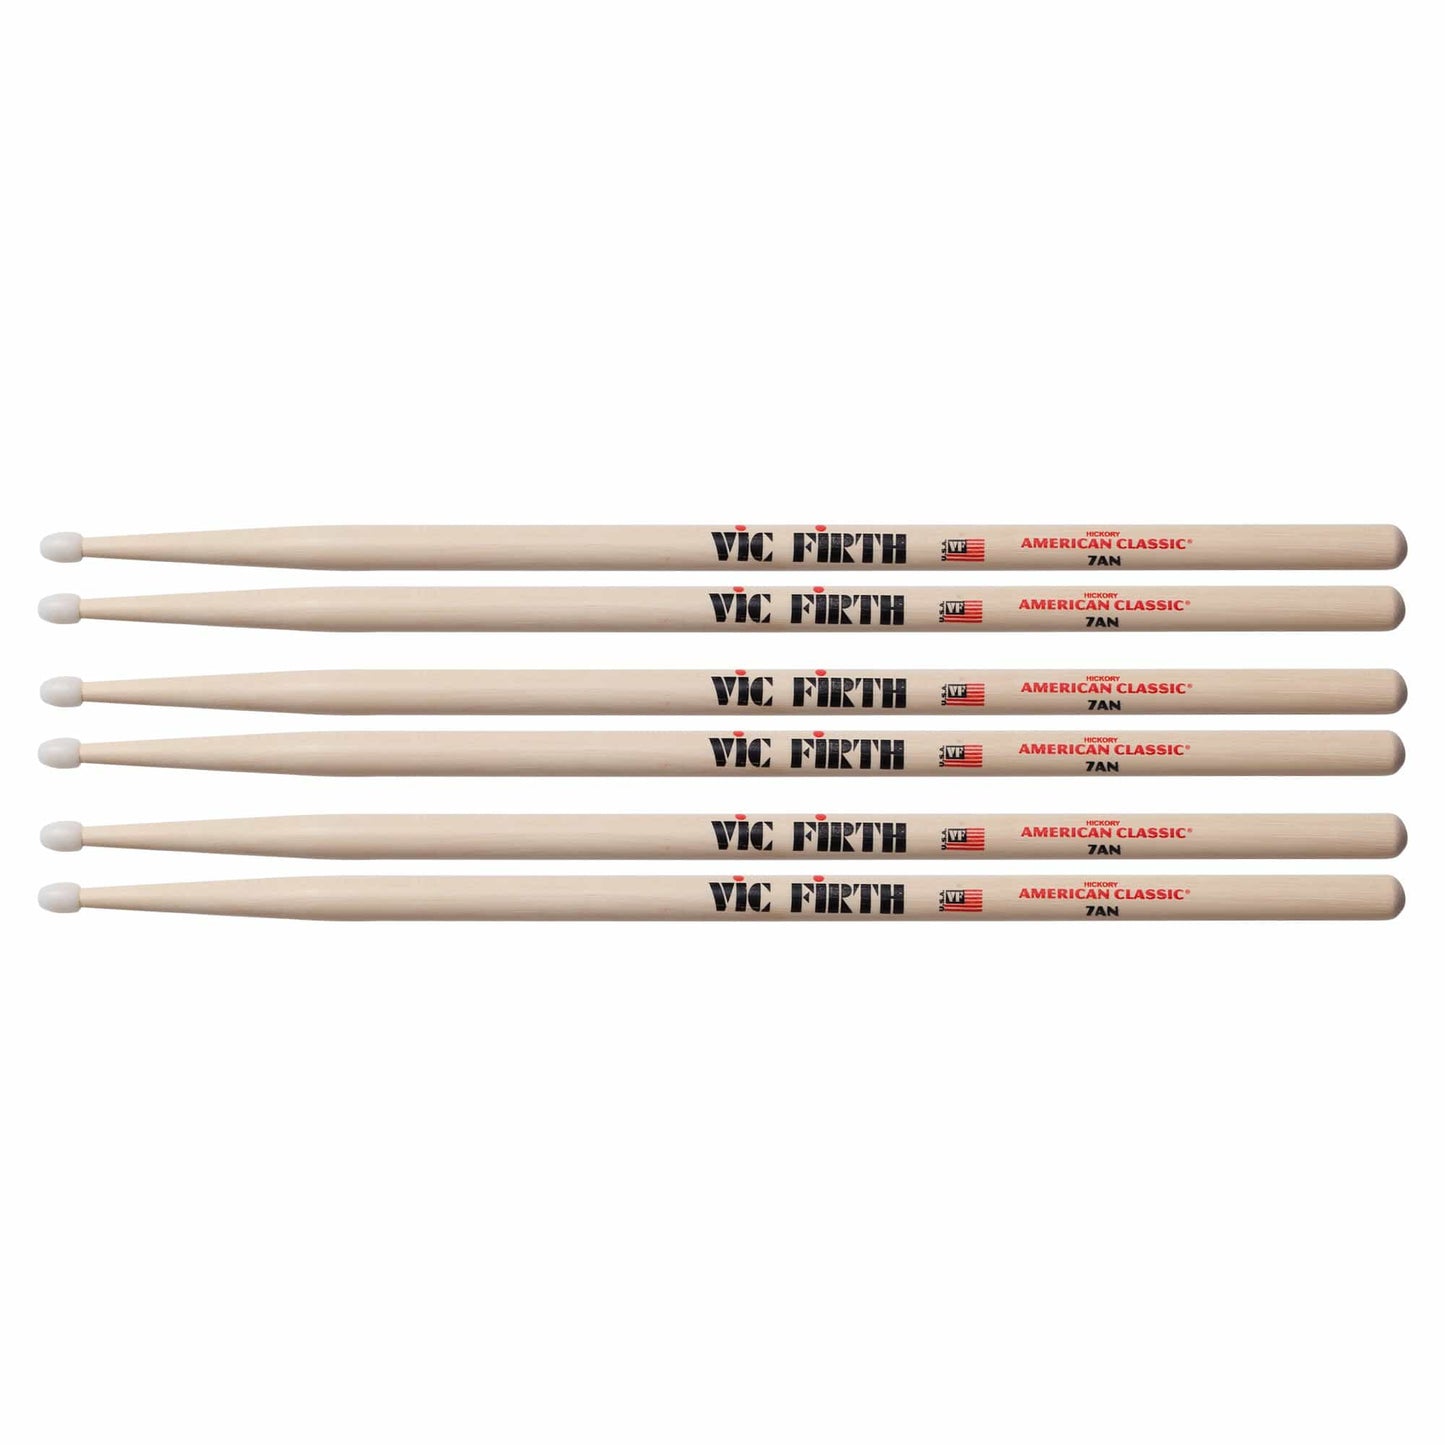 Vic Firth American Classic 7A Nylon Tip Drum Sticks (3 Pair Bundle) Drums and Percussion / Parts and Accessories / Drum Sticks and Mallets